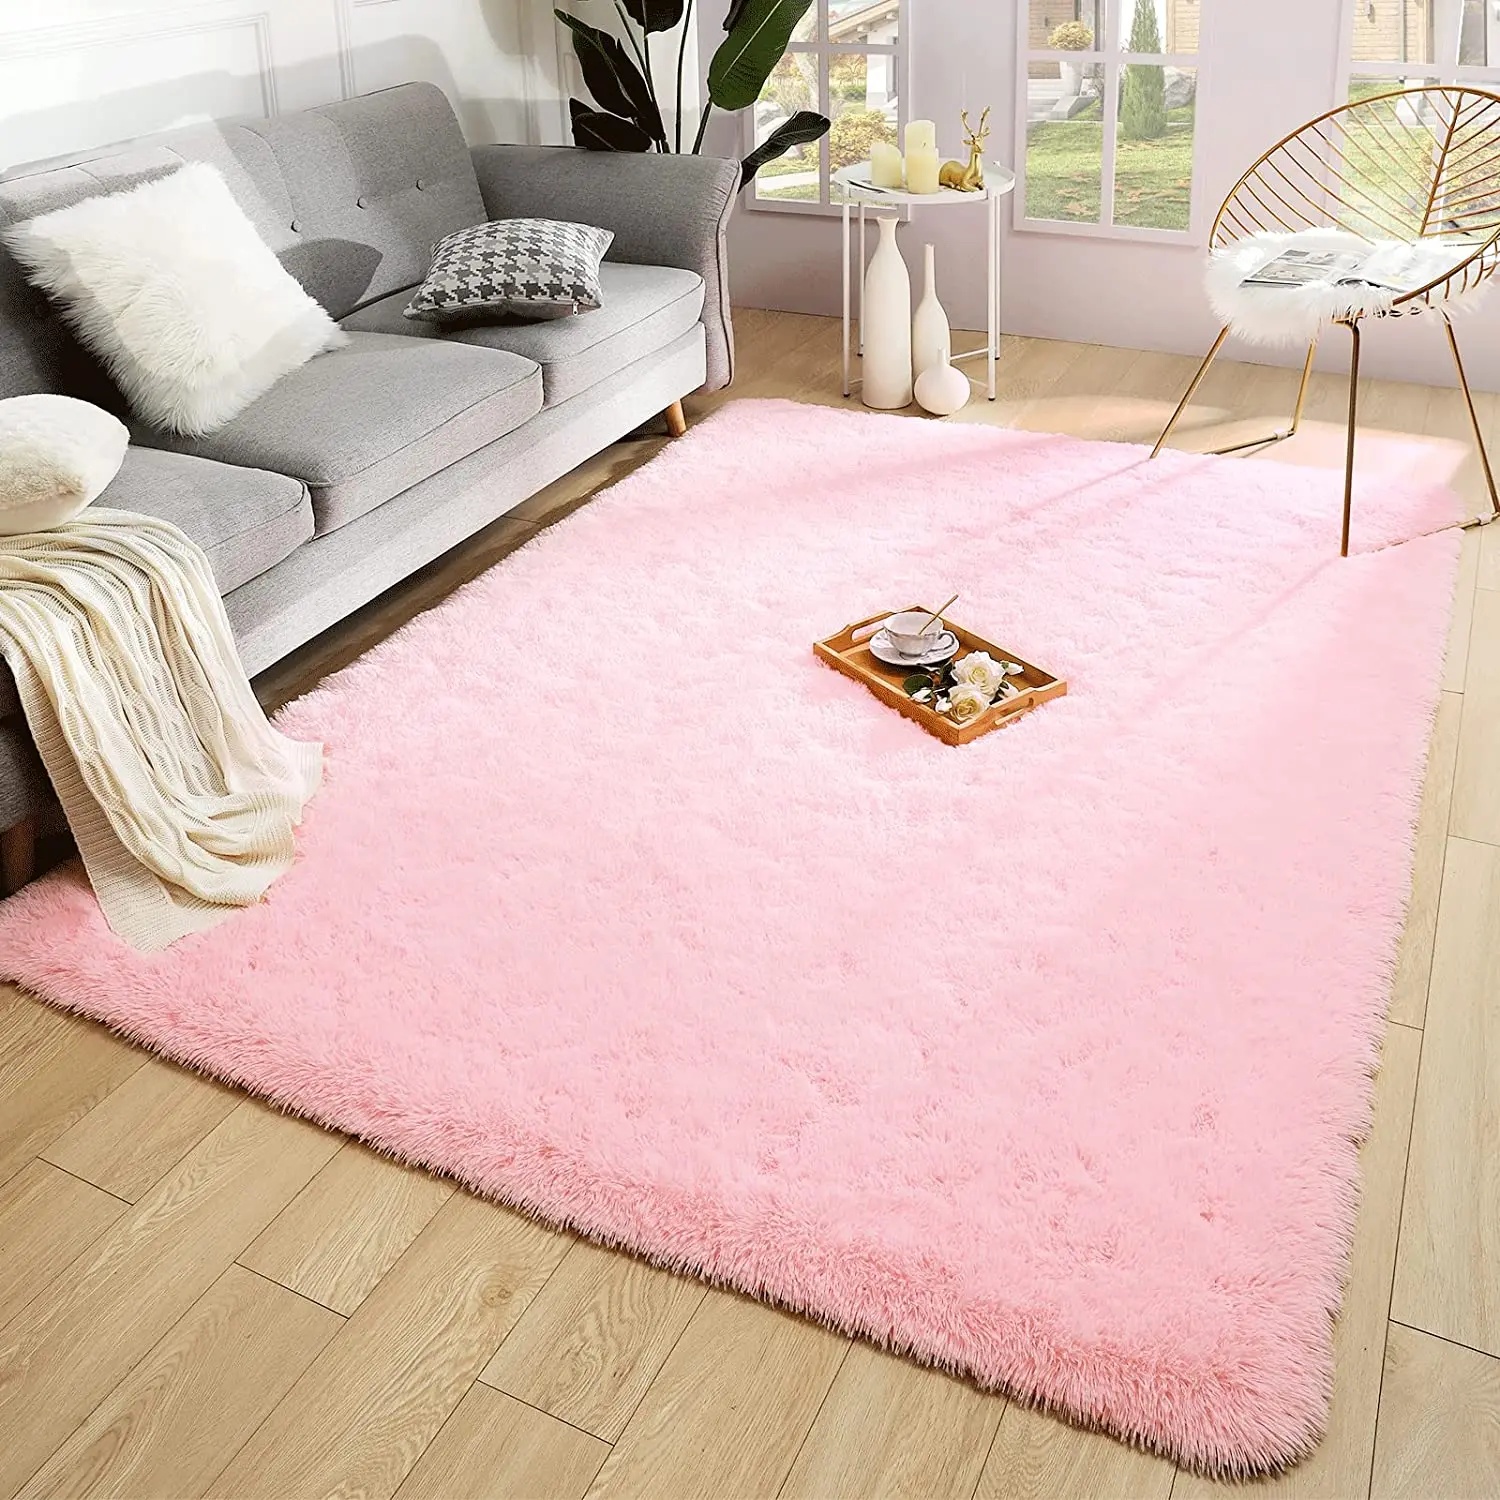 N pink rugs shaggy fluffy living room plush carpets for children bedroom bed floor foot thumb200